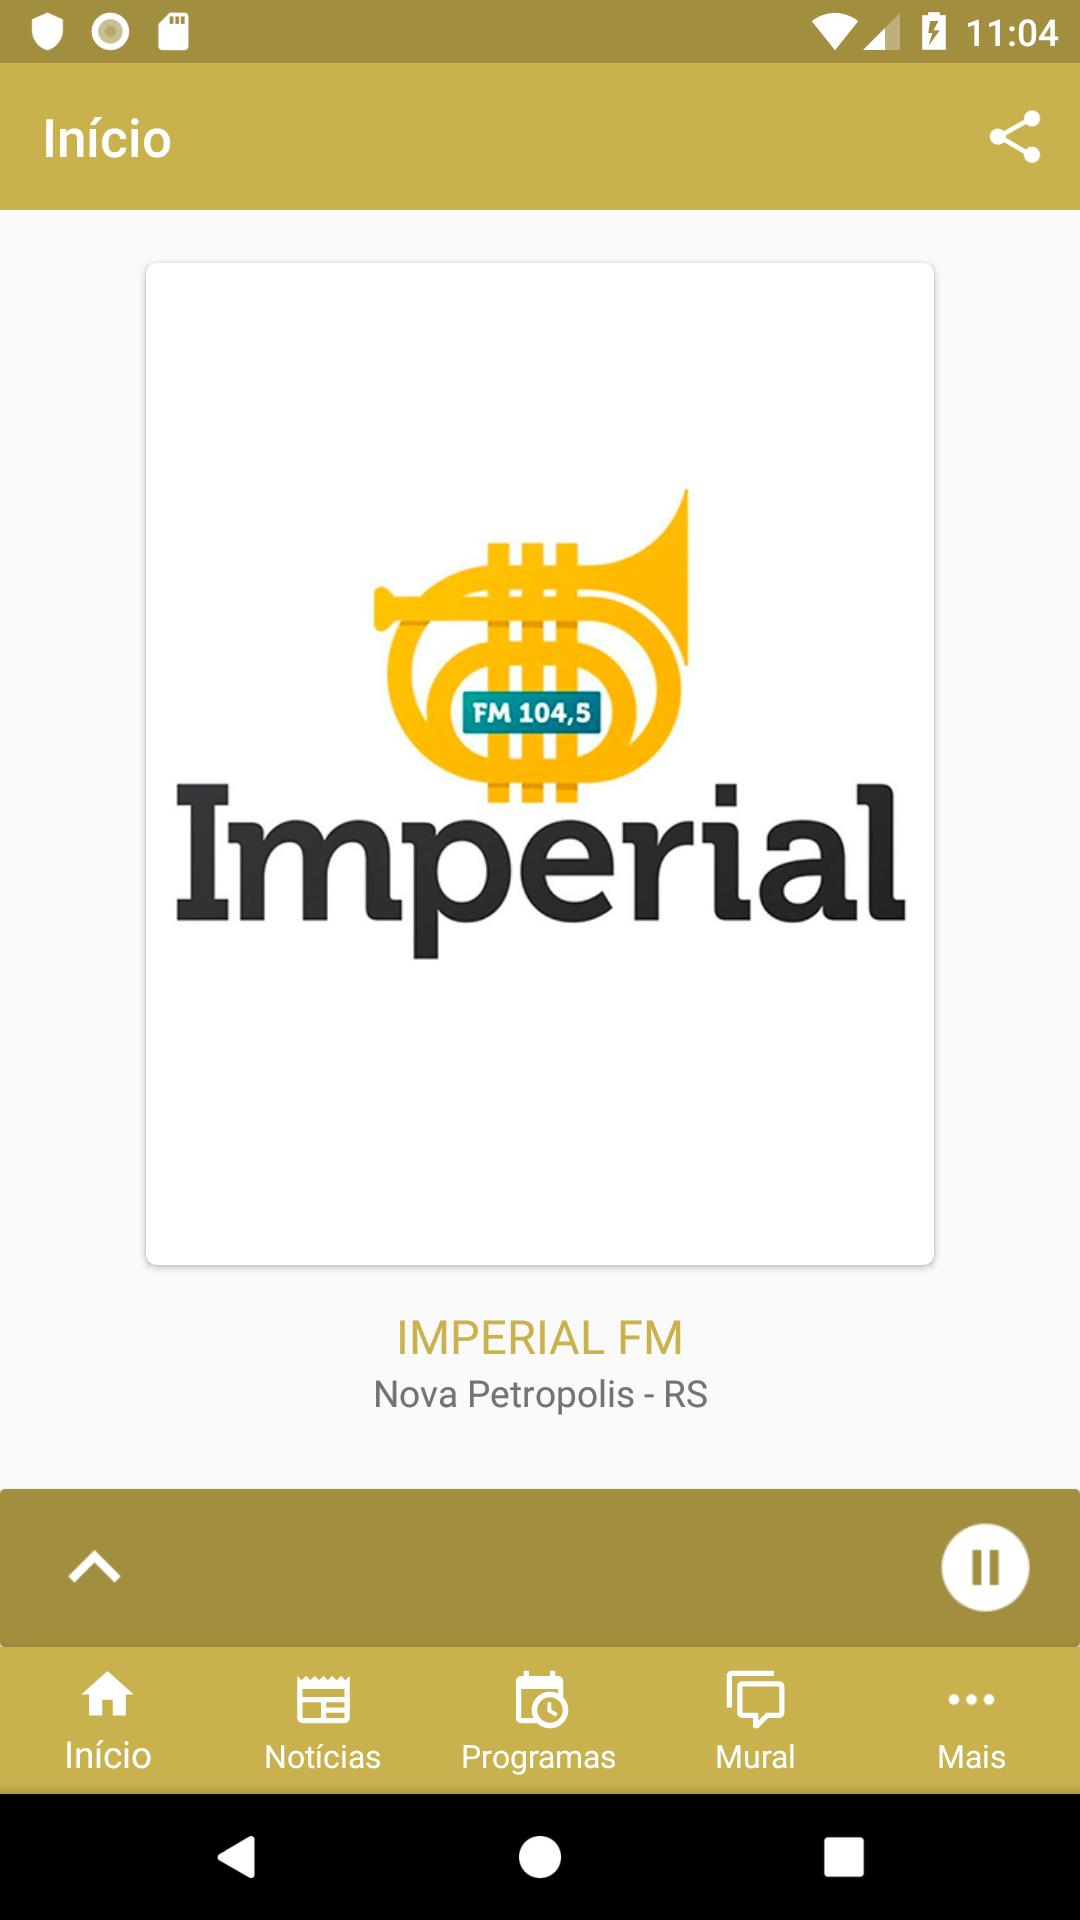 Rádio Imperial FM for Android - APK Download